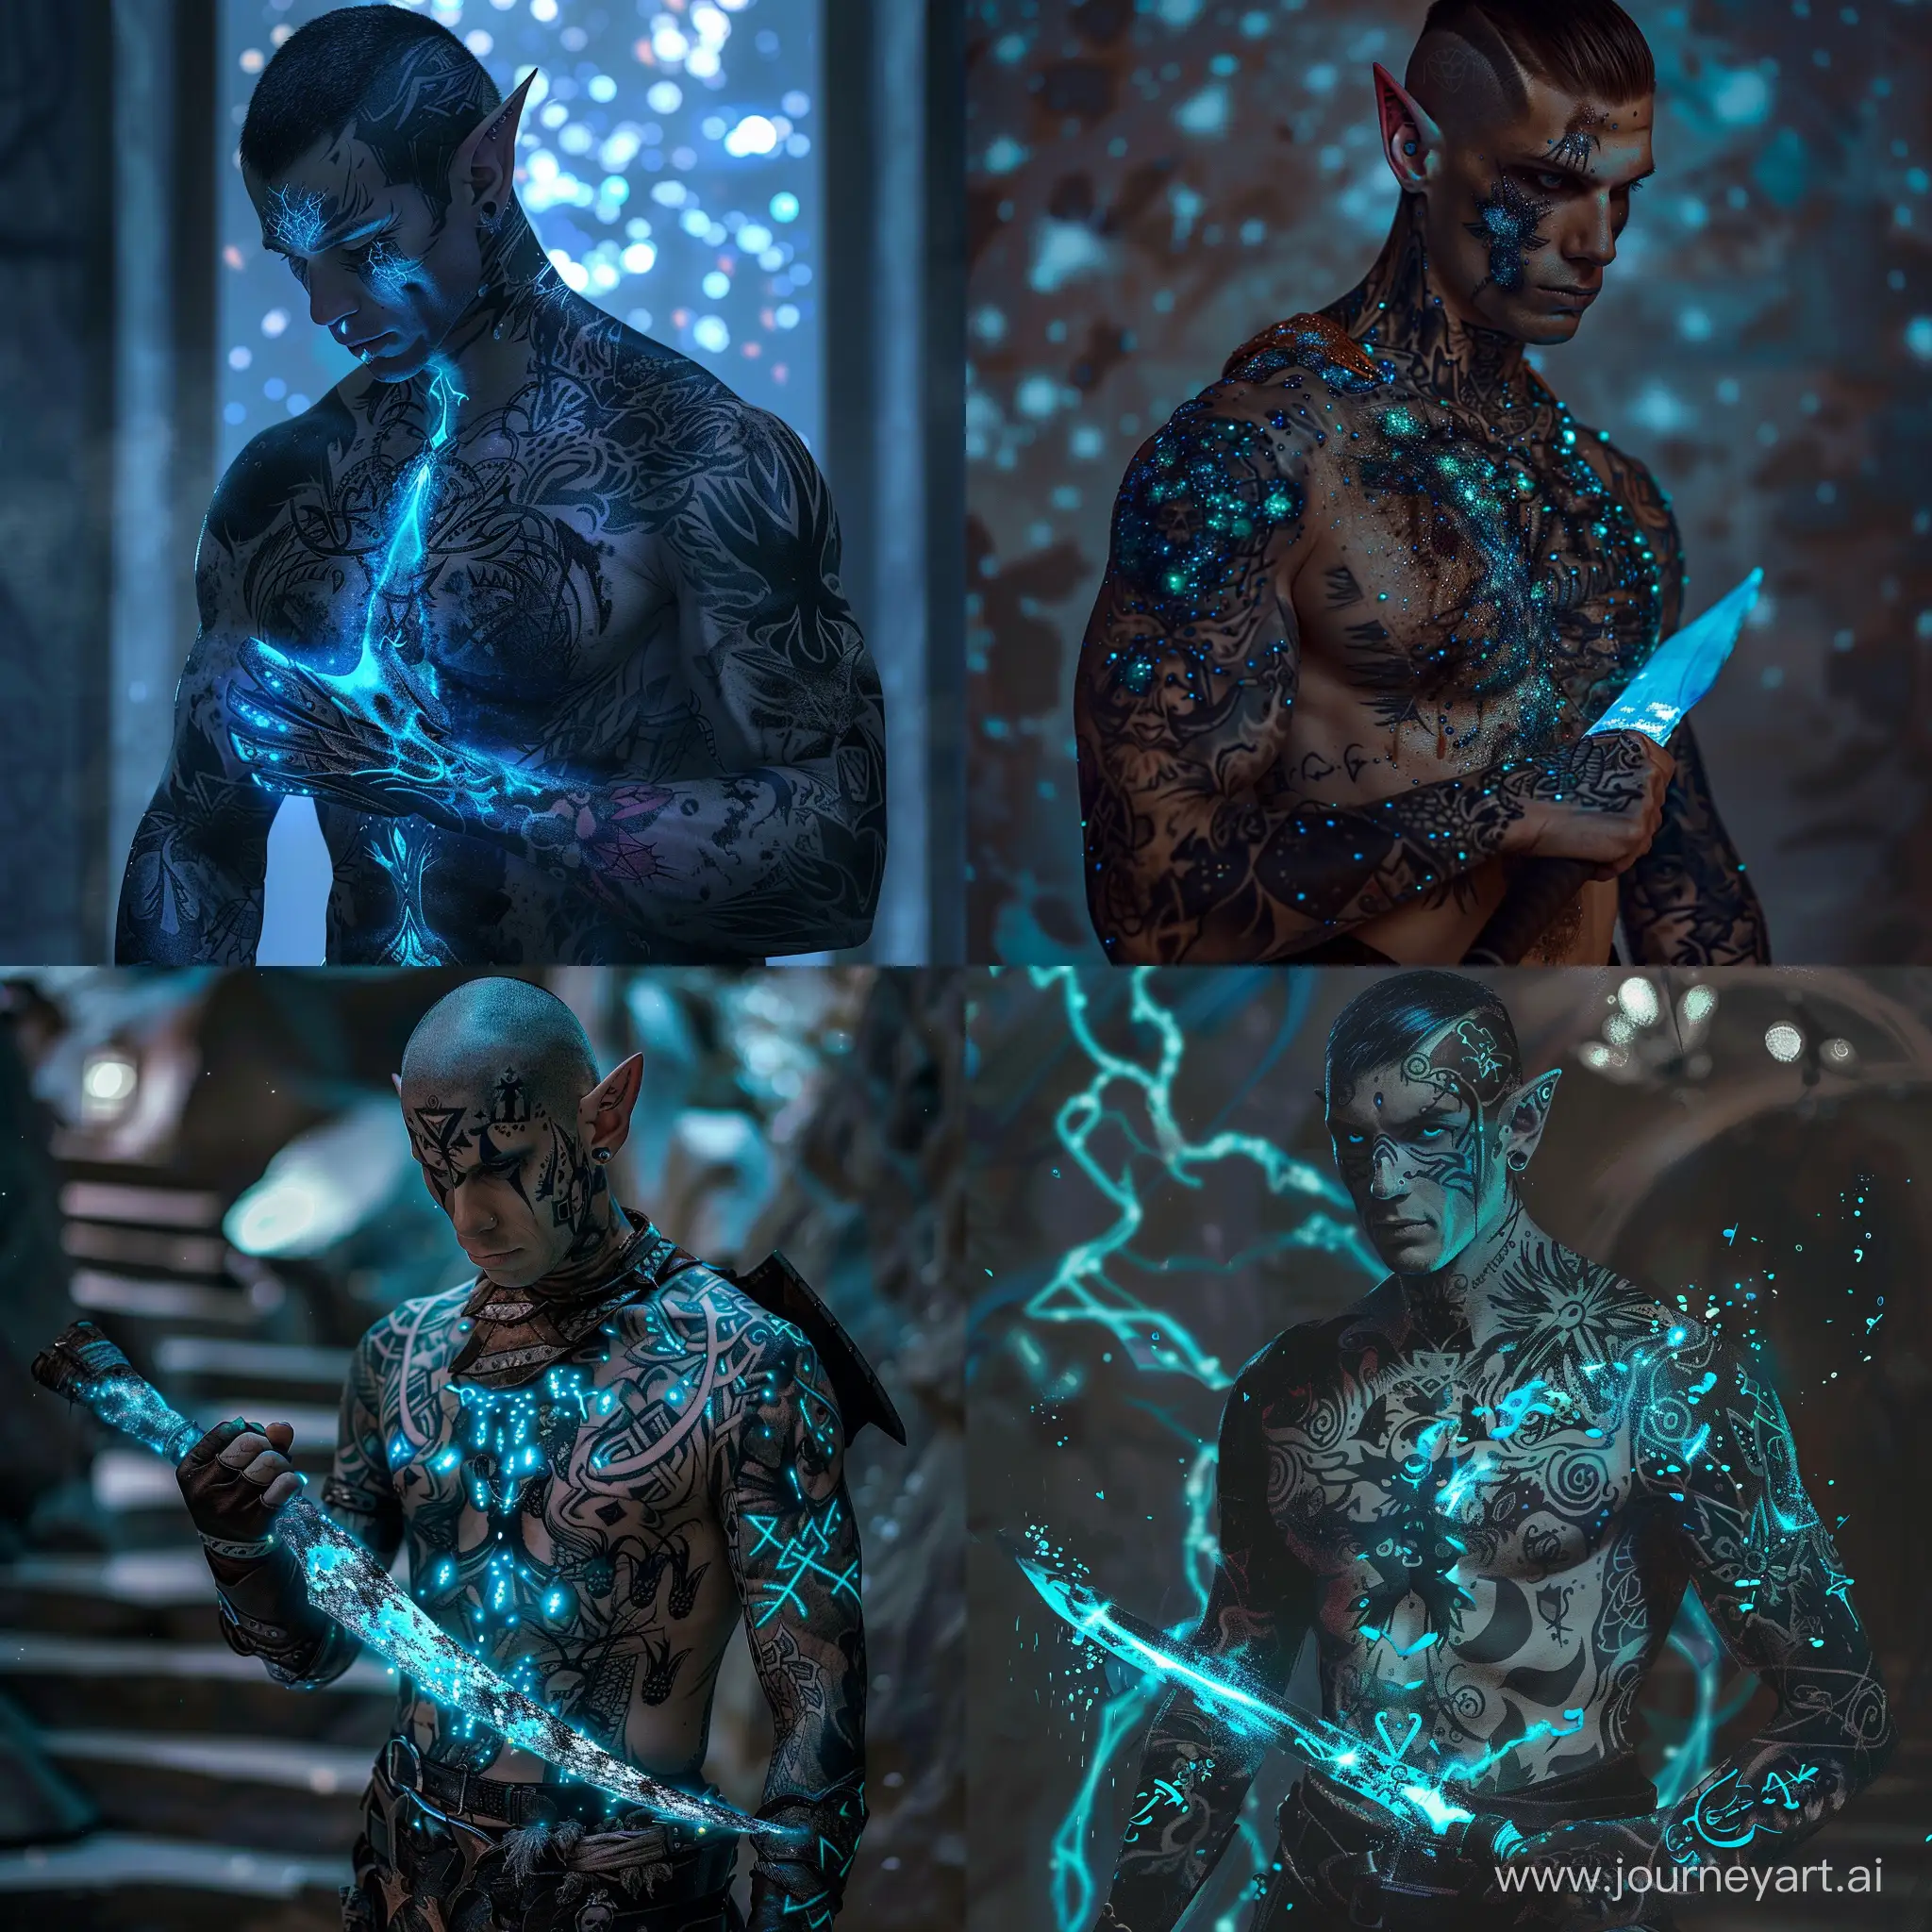 male, half-elf, covered in tattoos, tattoos look like harvested souls, Soulknife Rogue, Blade made of energy from the souls, Wearing minimal armour so we can see the tattoos, Tattoos glow with blue and black like the milky way galaxy